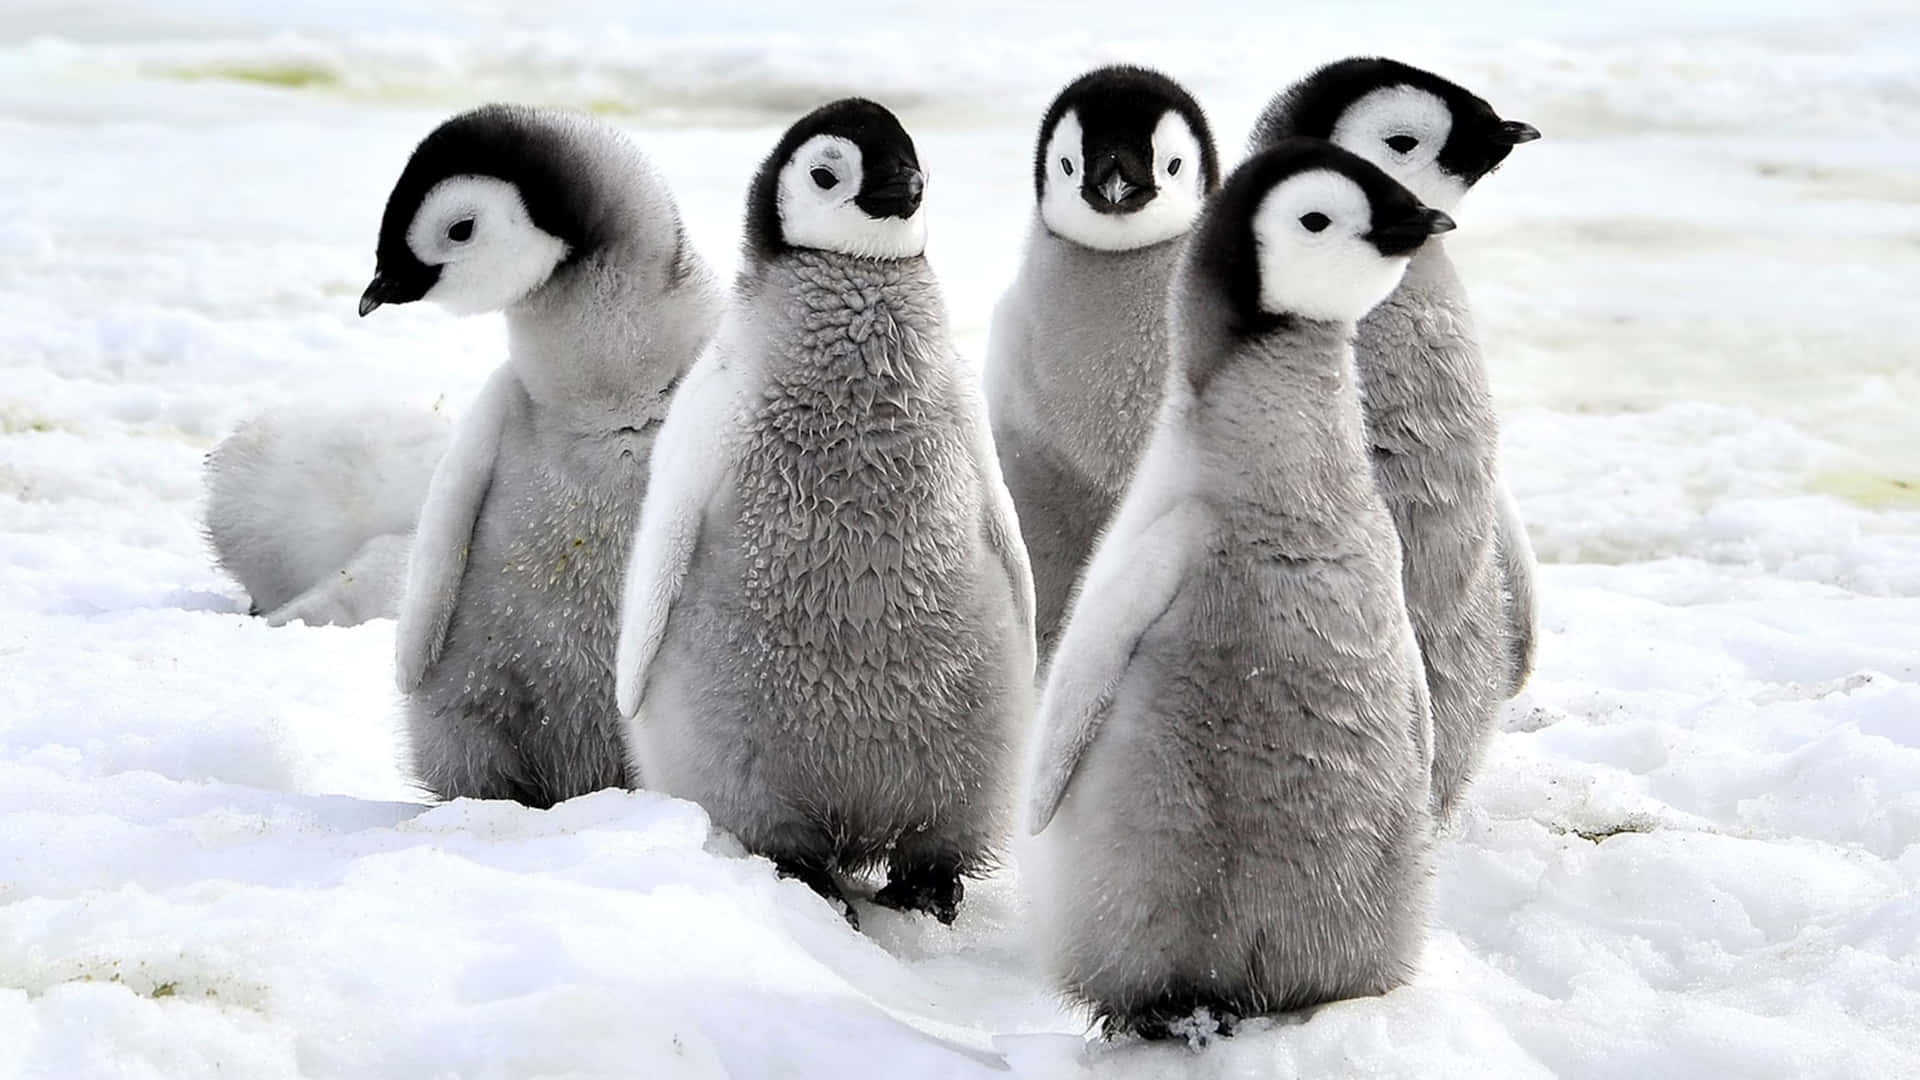 Love is in the air with these extra cuddly penguins